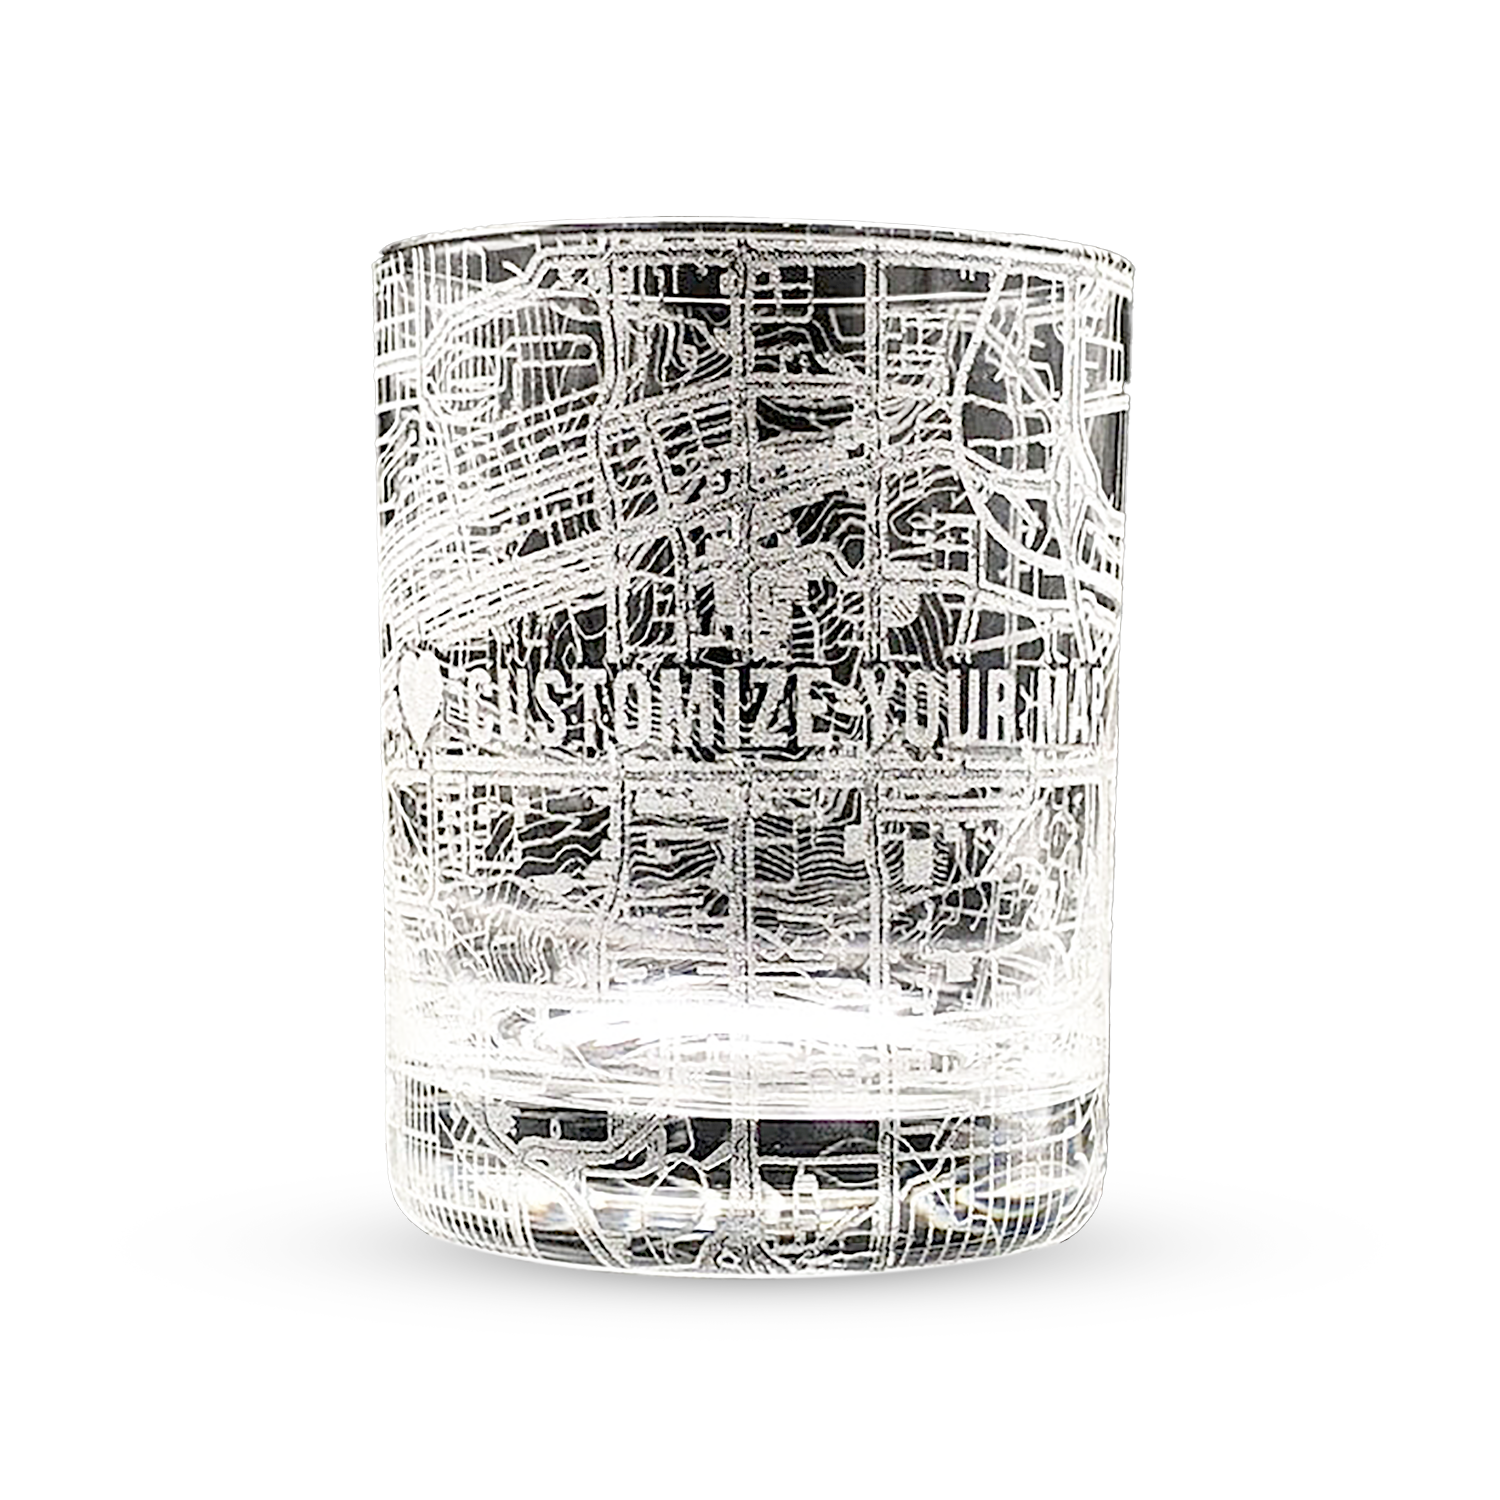 Louisville City Map Rocks Glass Engraved Whiskey Glass 